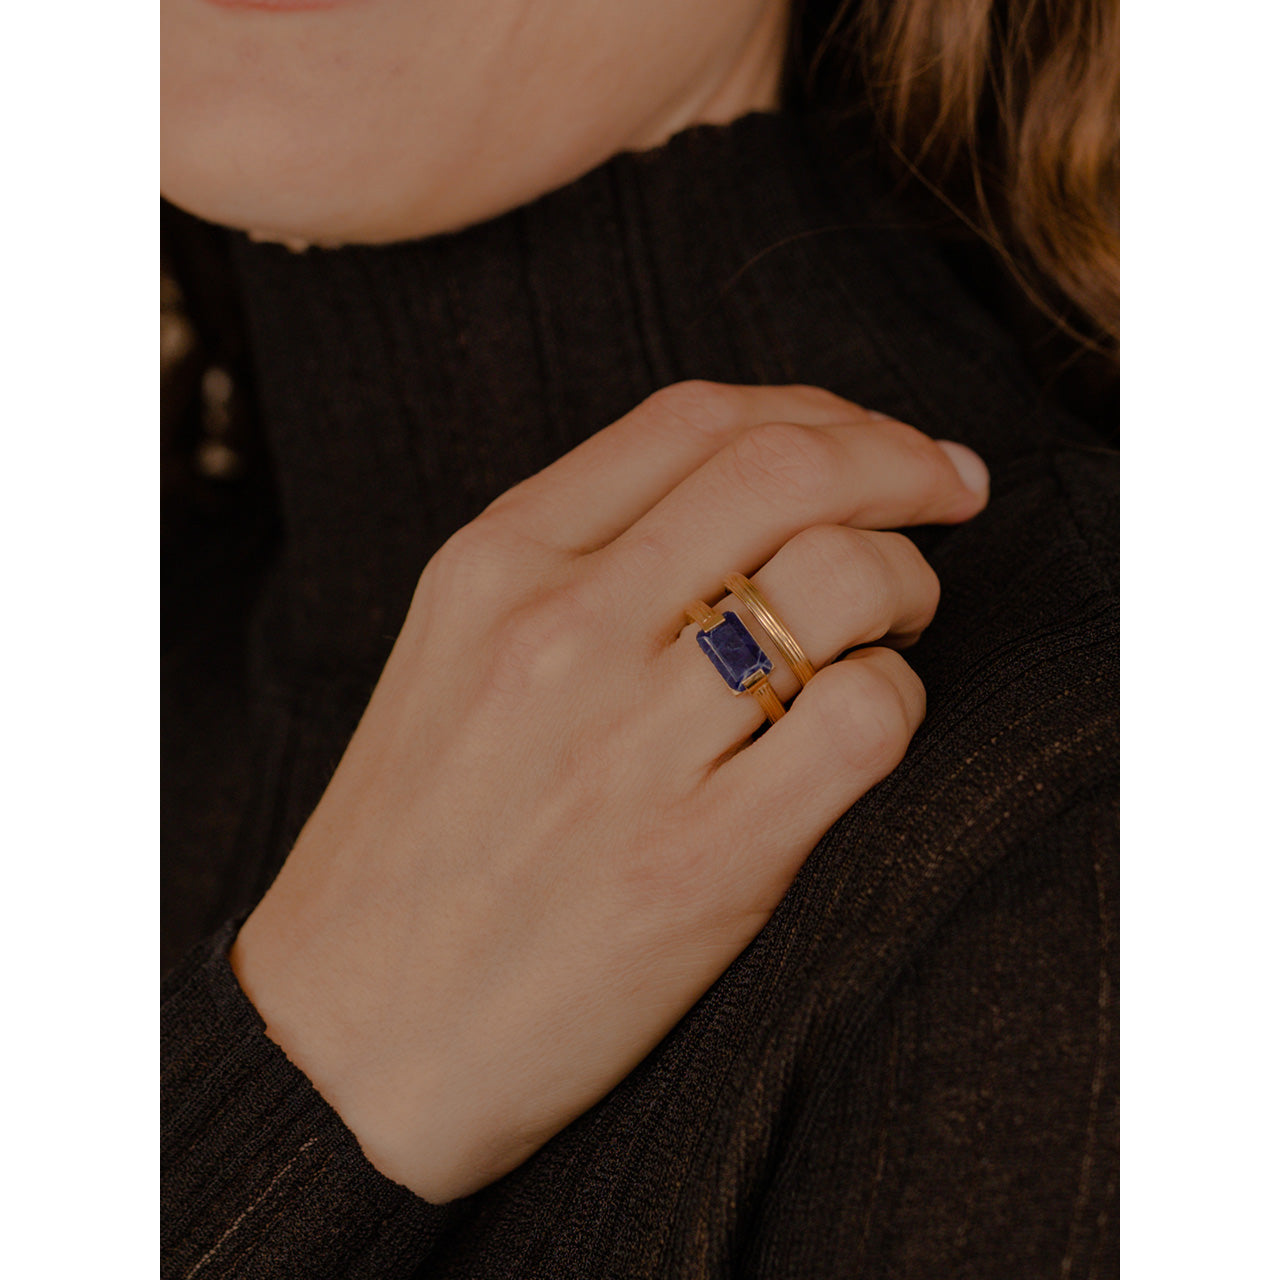 This striking statement ring with two chunky round bands, intricately engraved with a linear pattern, and a wide space elegantly separating them.